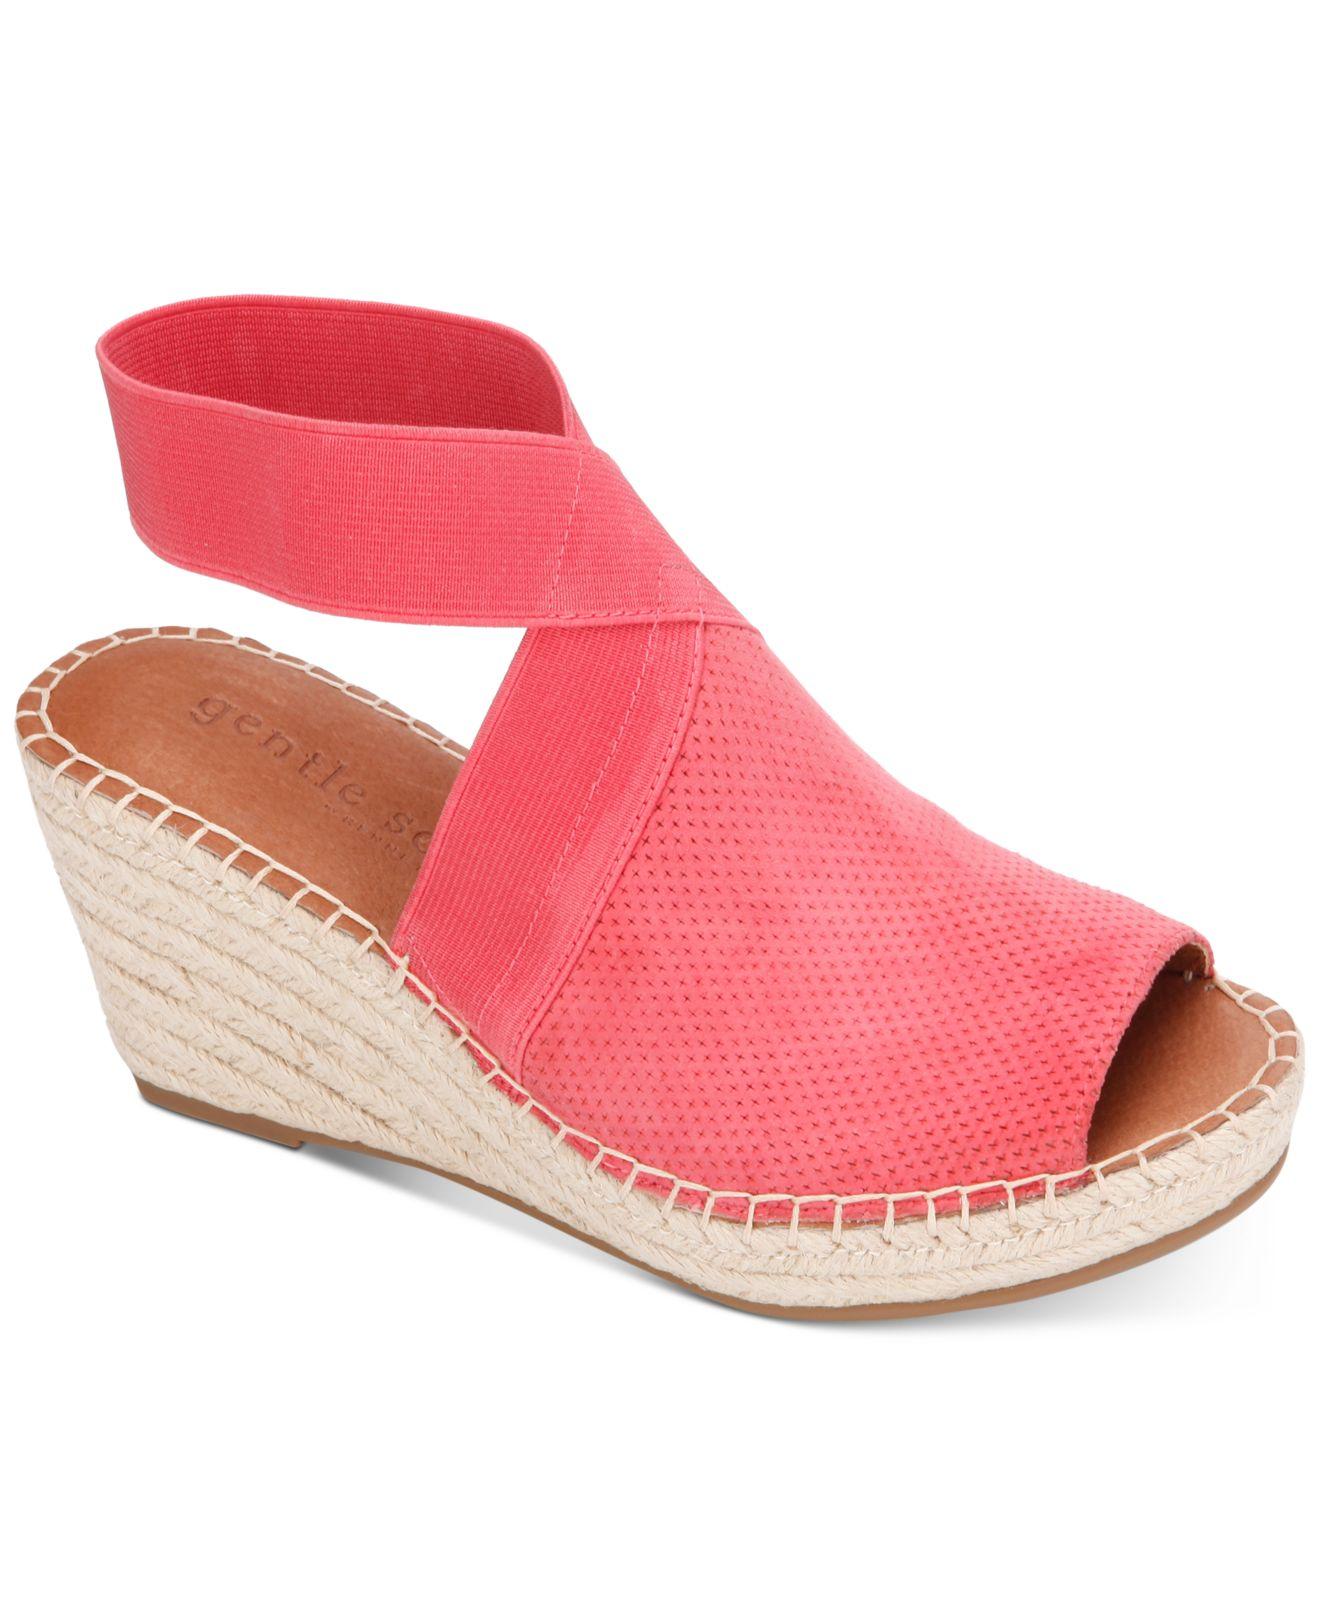 Gentle Souls Leather Charli Elastic Espadrille Wedge Sandals in Coral ...